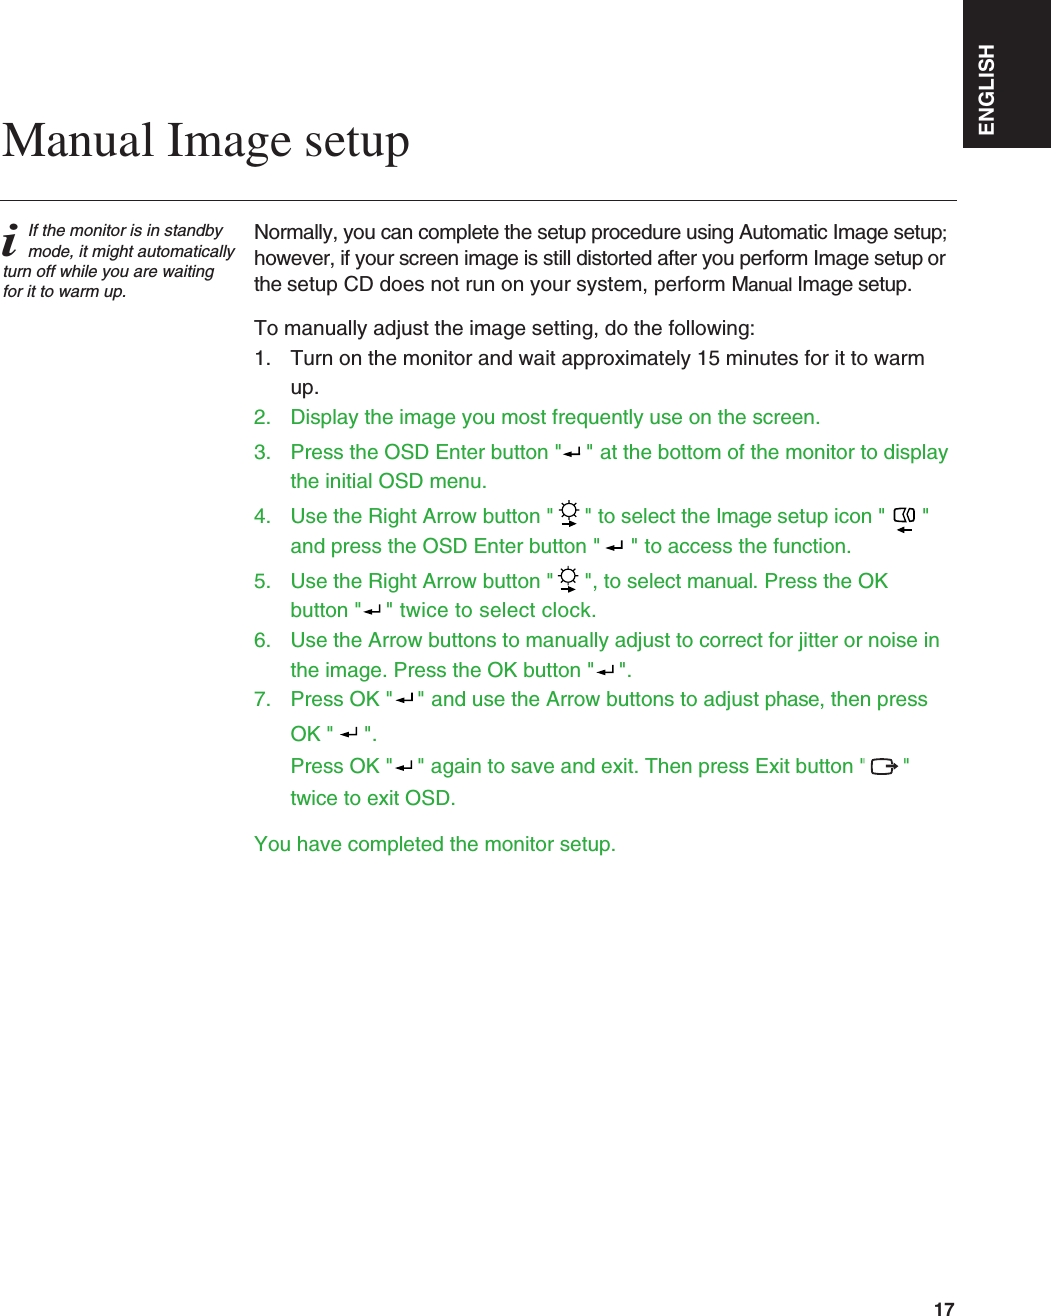 Normally, you can complete the setup procedure using Automatic Image setup;however, if your screen image is still distorted after you perform Image setup orthe setup CD does not run on your system, perform Manual Image setup.To manually adjust the image setting, do the following:1.  Turn on the monitor and wait approximately 15 minutes for it to warm up.2. Display the image you most frequently use on the screen.3.  Press the OSD Enter button &quot;  &quot; at the bottom of the monitor to displaythe initial OSD menu.4.  Use the Right Arrow button &quot; &quot; to select the Image setup icon &quot;  &quot;and press the OSD Enter button &quot;  &quot; to access the function.5.  Use the Right Arrow button &quot; &quot;, to select manual. Press the OKbutton &quot;  &quot; twice to select clock.6.  Use the Arrow buttons to manually adjust to correct for jitter or noise in the image. Press the OK button &quot; &quot;.  7.  Press OK &quot; &quot; and use the Arrow buttons to adjust phase, then press OK &quot;  &quot;.      Press OK &quot; &quot; again to save and exit. Then press Exit button &quot;    &quot;twice to exit OSD.You have completed the monitor setup.ENGLISH17iIf the monitor is in standbymode, it might automaticallyturn off while you are waitingfor it to warm up.Manual Image setup